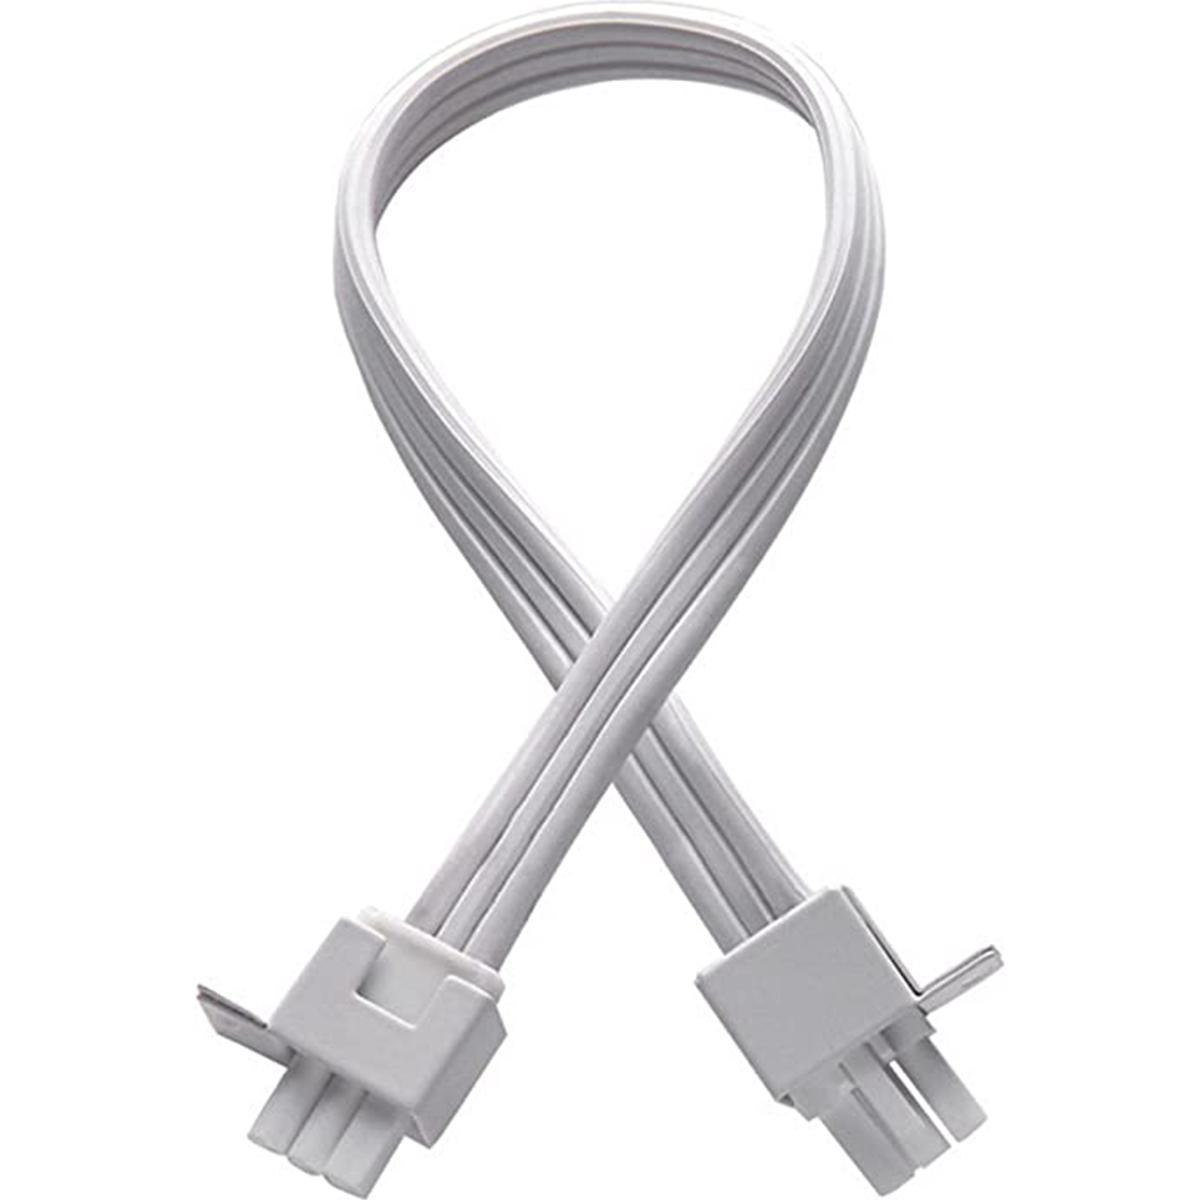 24in. Interconnect Cable For Undercabinet Lights, White Finish